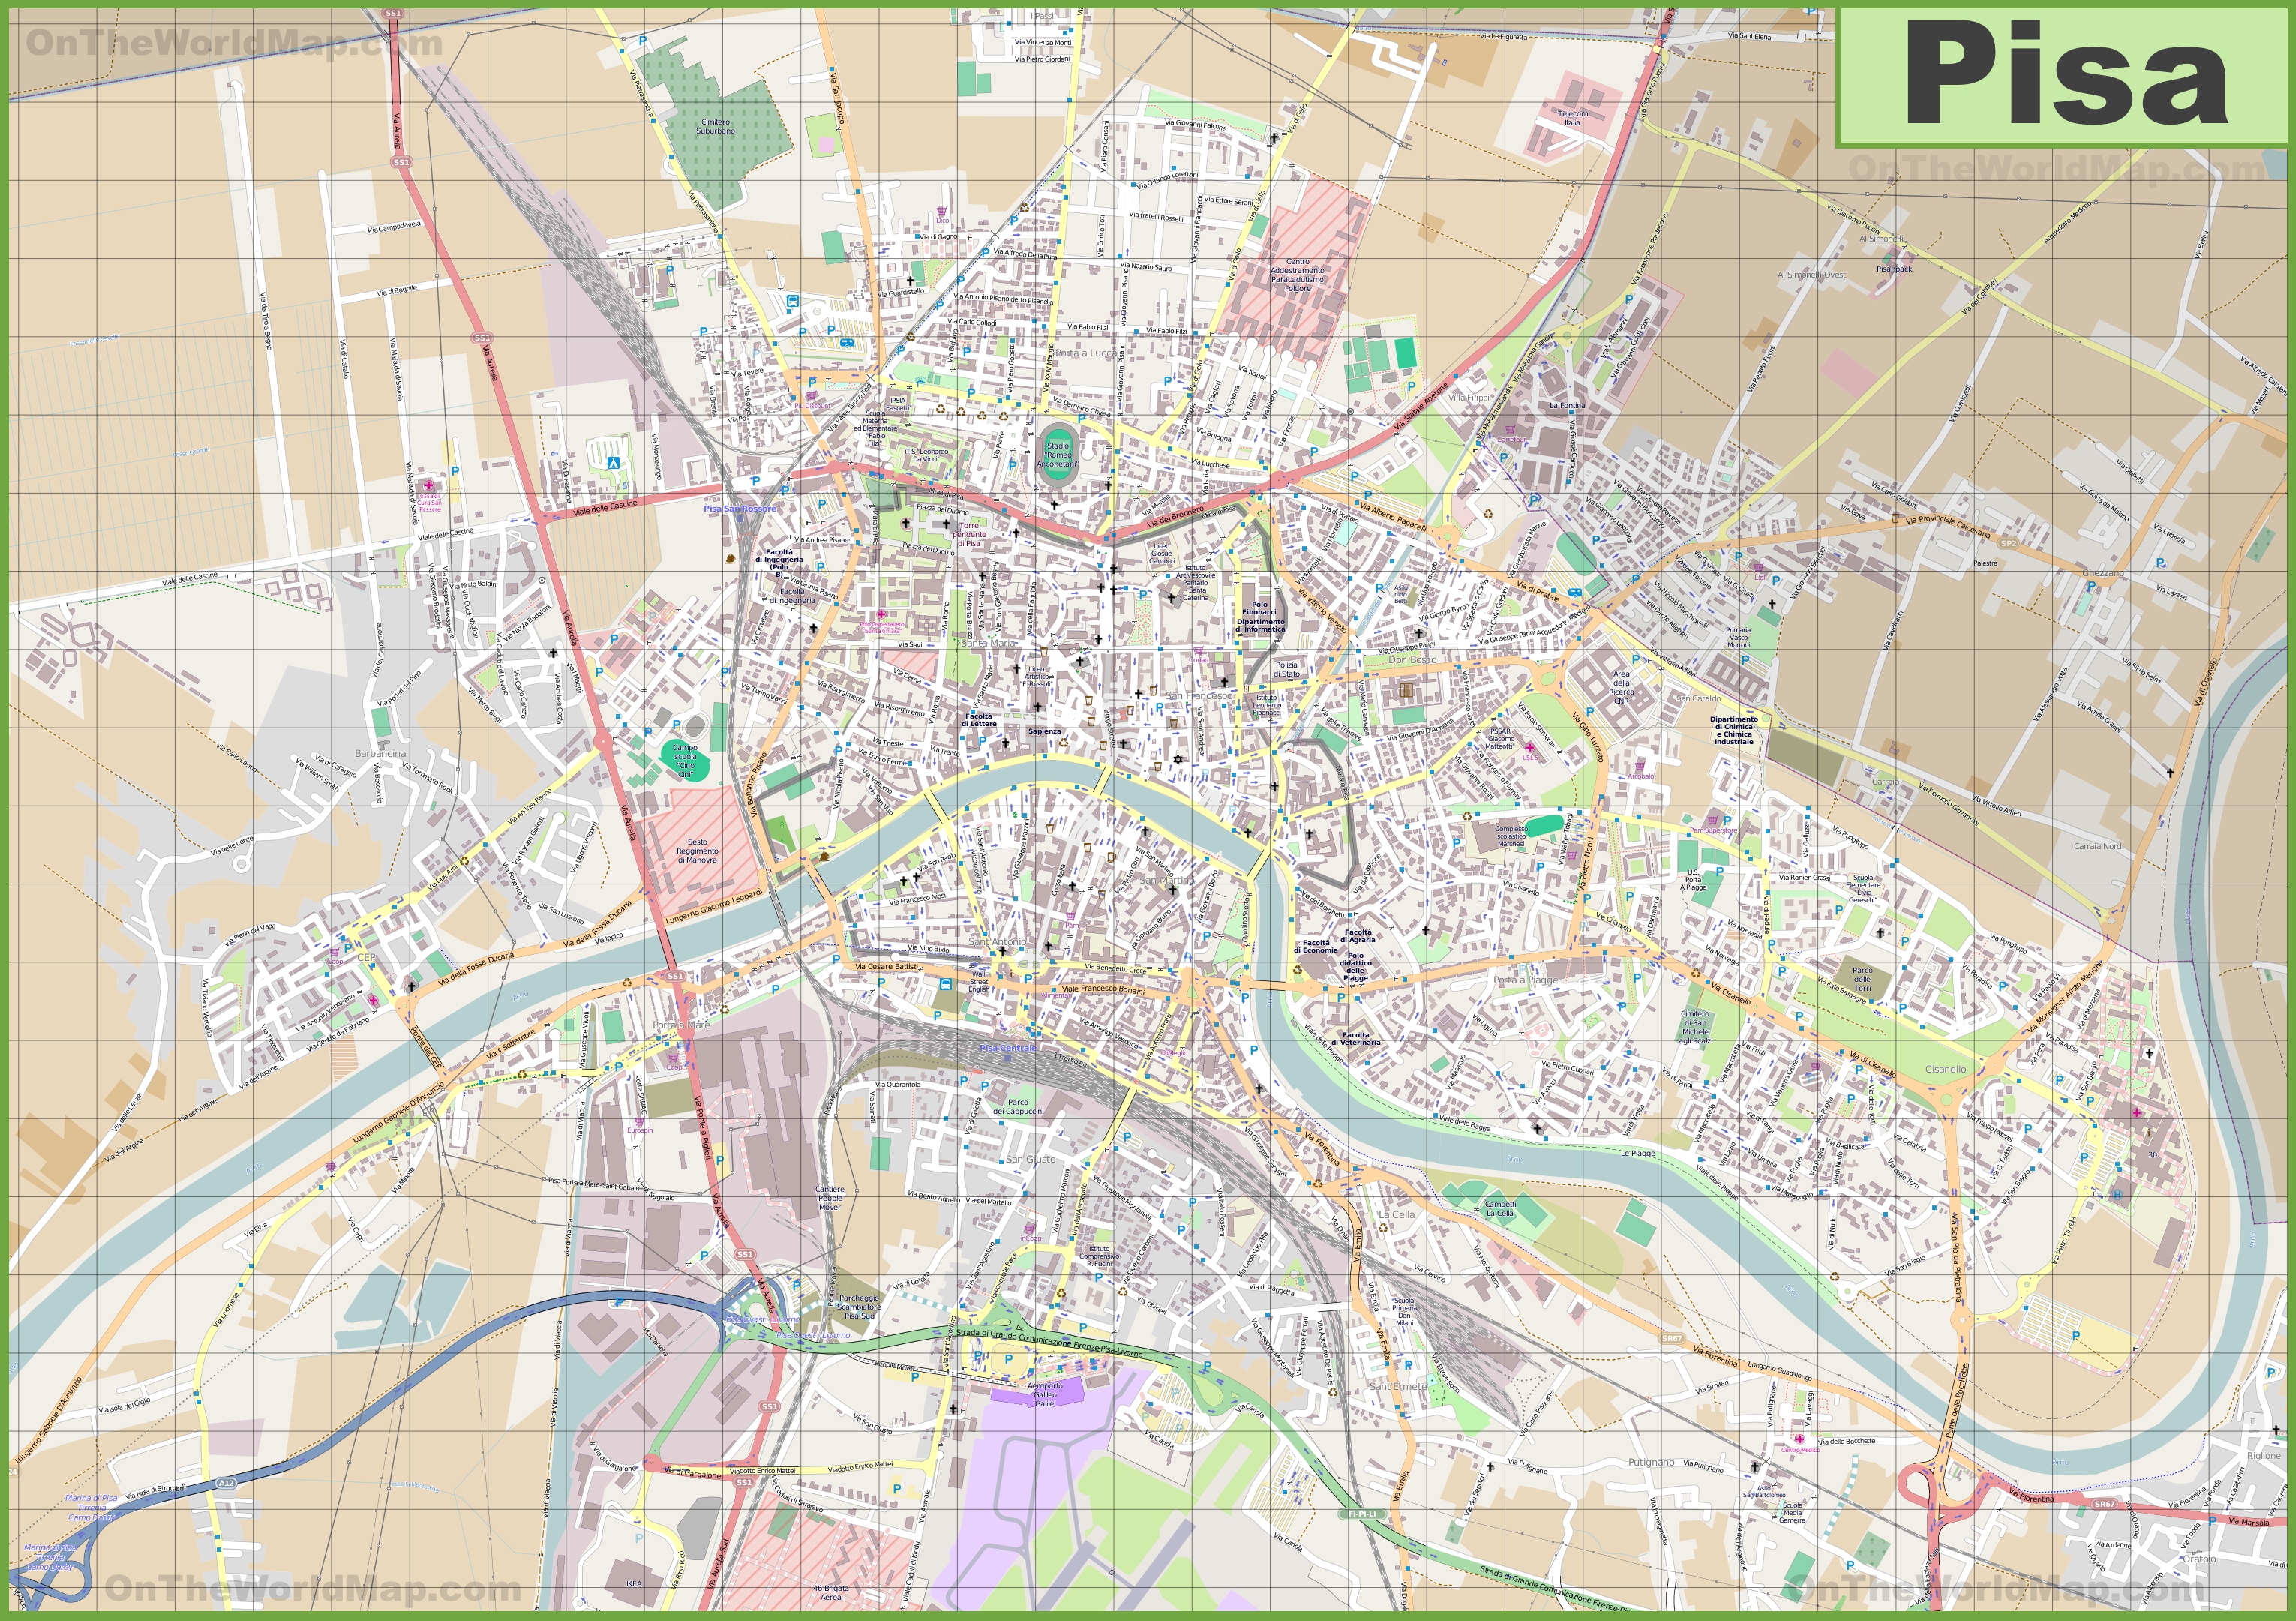 30 Map Of Pisa Italy - Maps Database Source